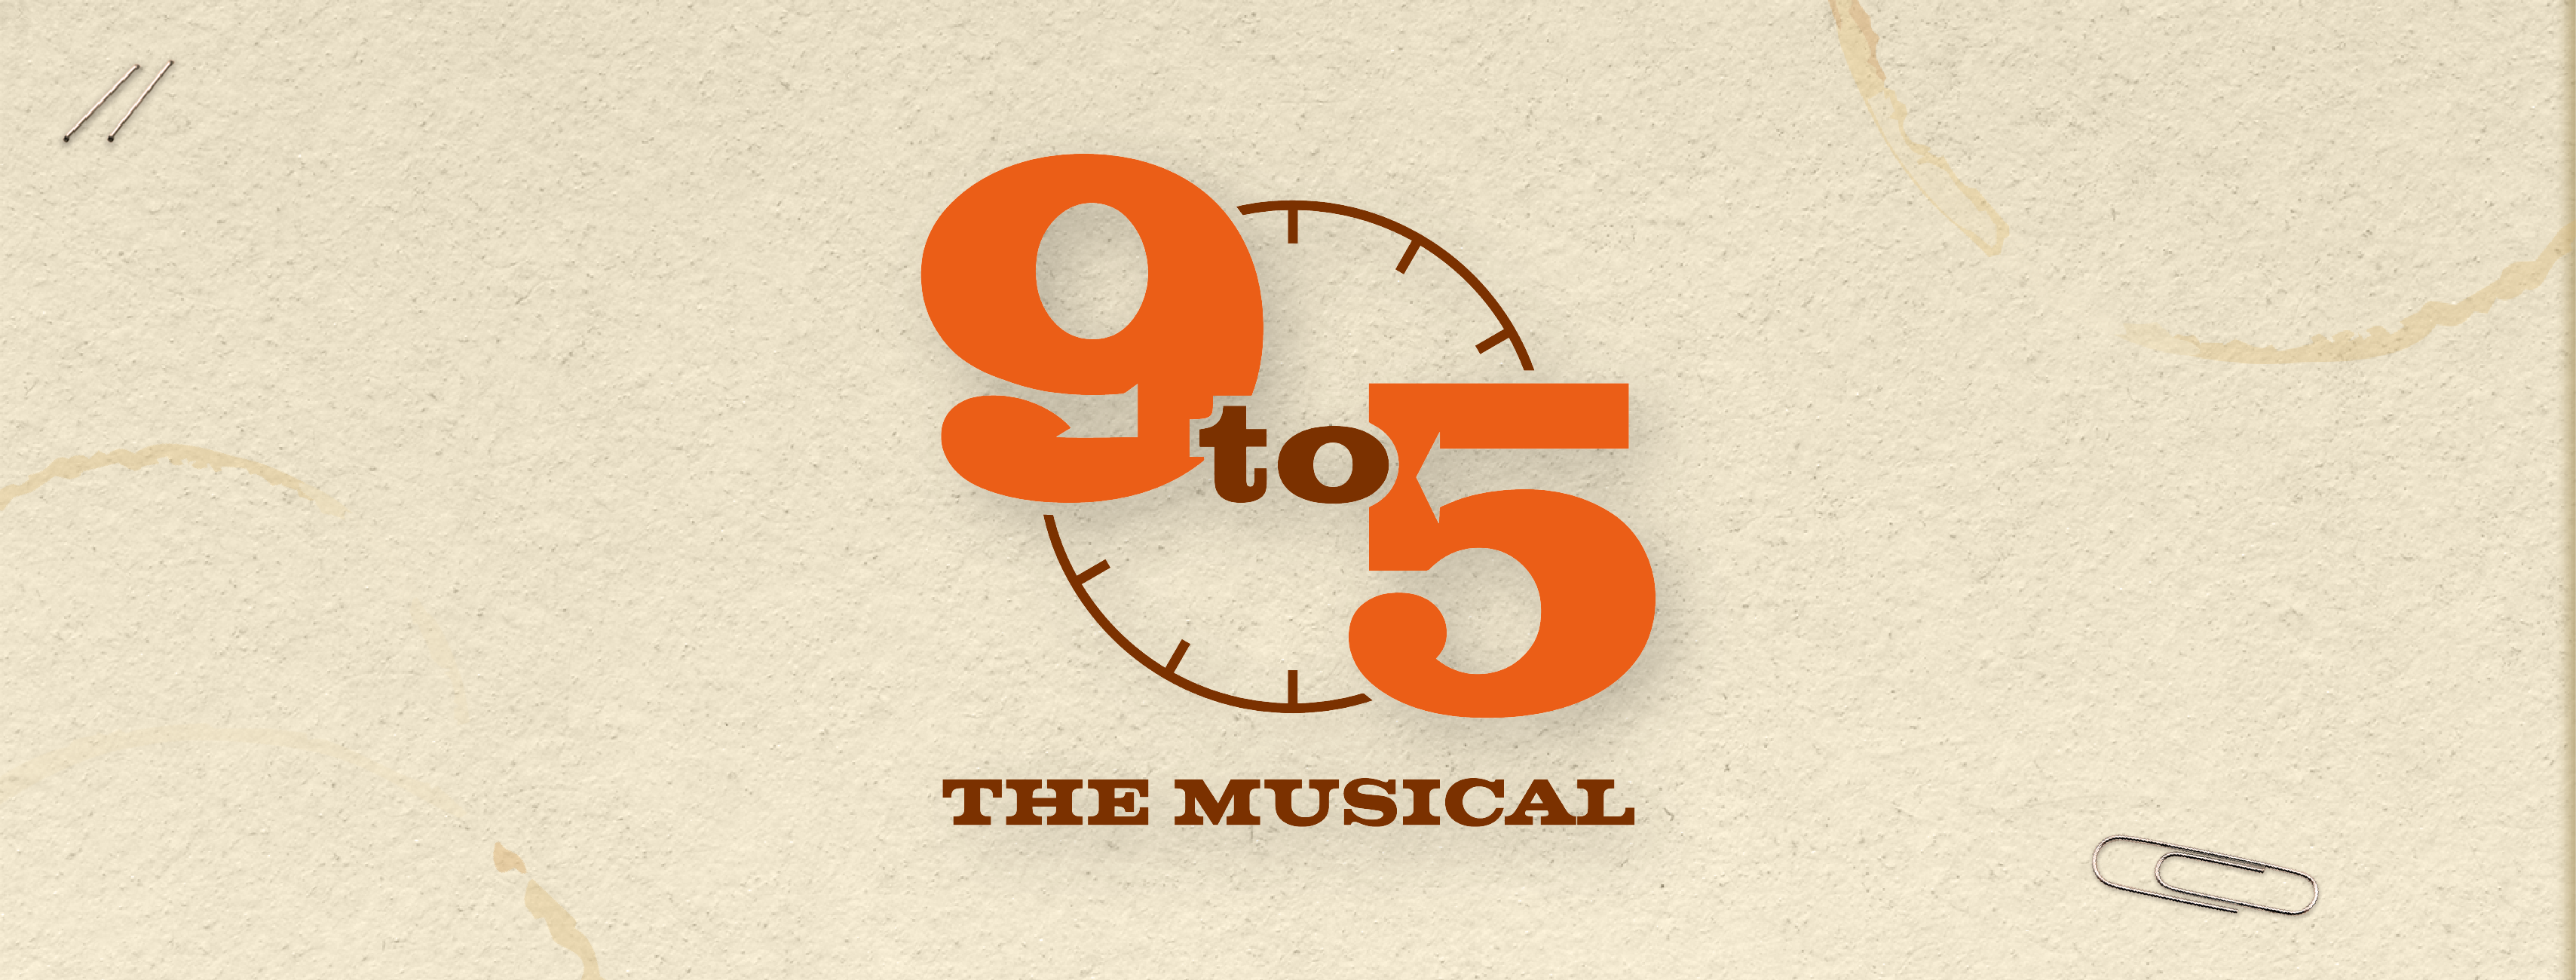 9to5-themusical